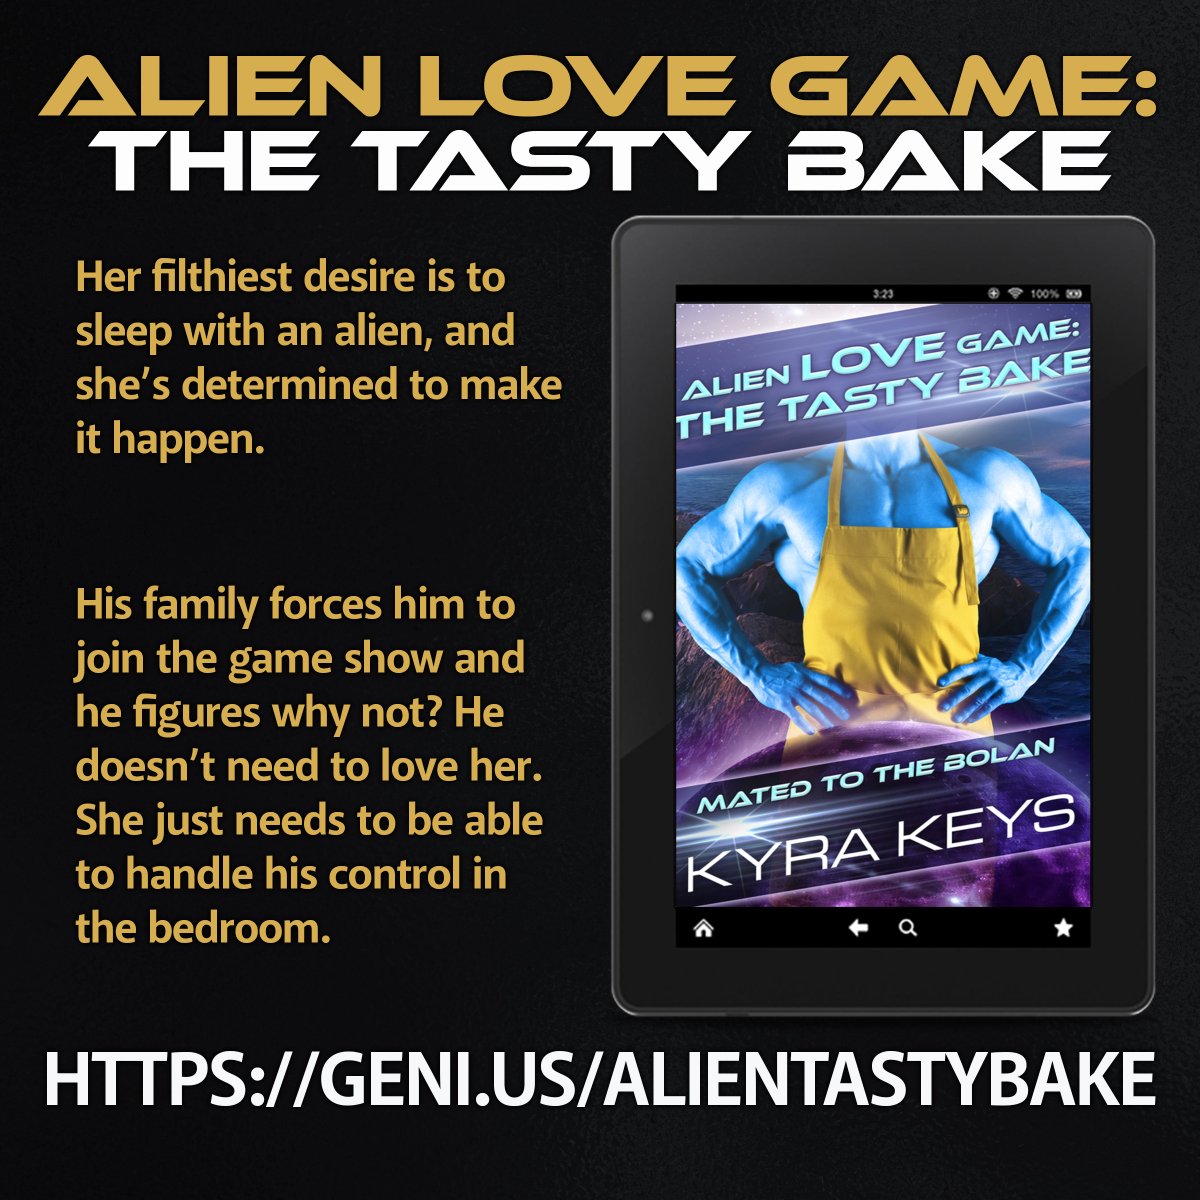 Have you read Alien Love Games: The Tasty Bake: Sci Fi Alien Romance (Mated to the Bolan) by @KyraKeys yet? geni.us/alientastybake

Her filthiest desire is to sleep with an alien, and she’s determined to make it happen.

#MatedtotheBolan #SciFiErotica